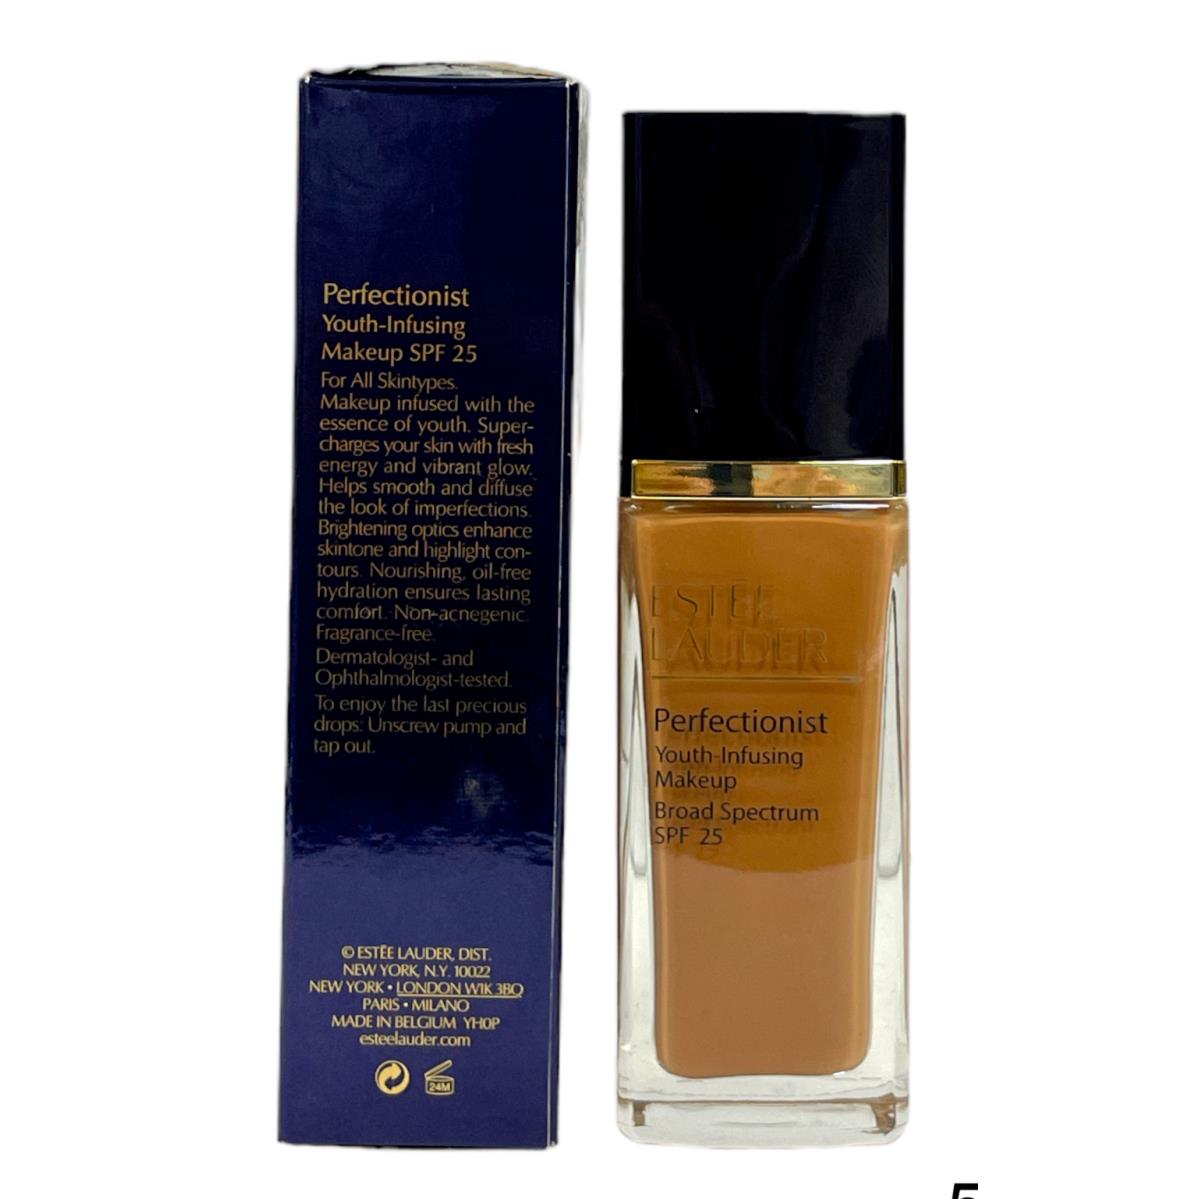 Estee Lauder Perfectionist Youth Infusing Makeup SPF25 1oz / 30mL You Pick 5C1 CHESTNUT